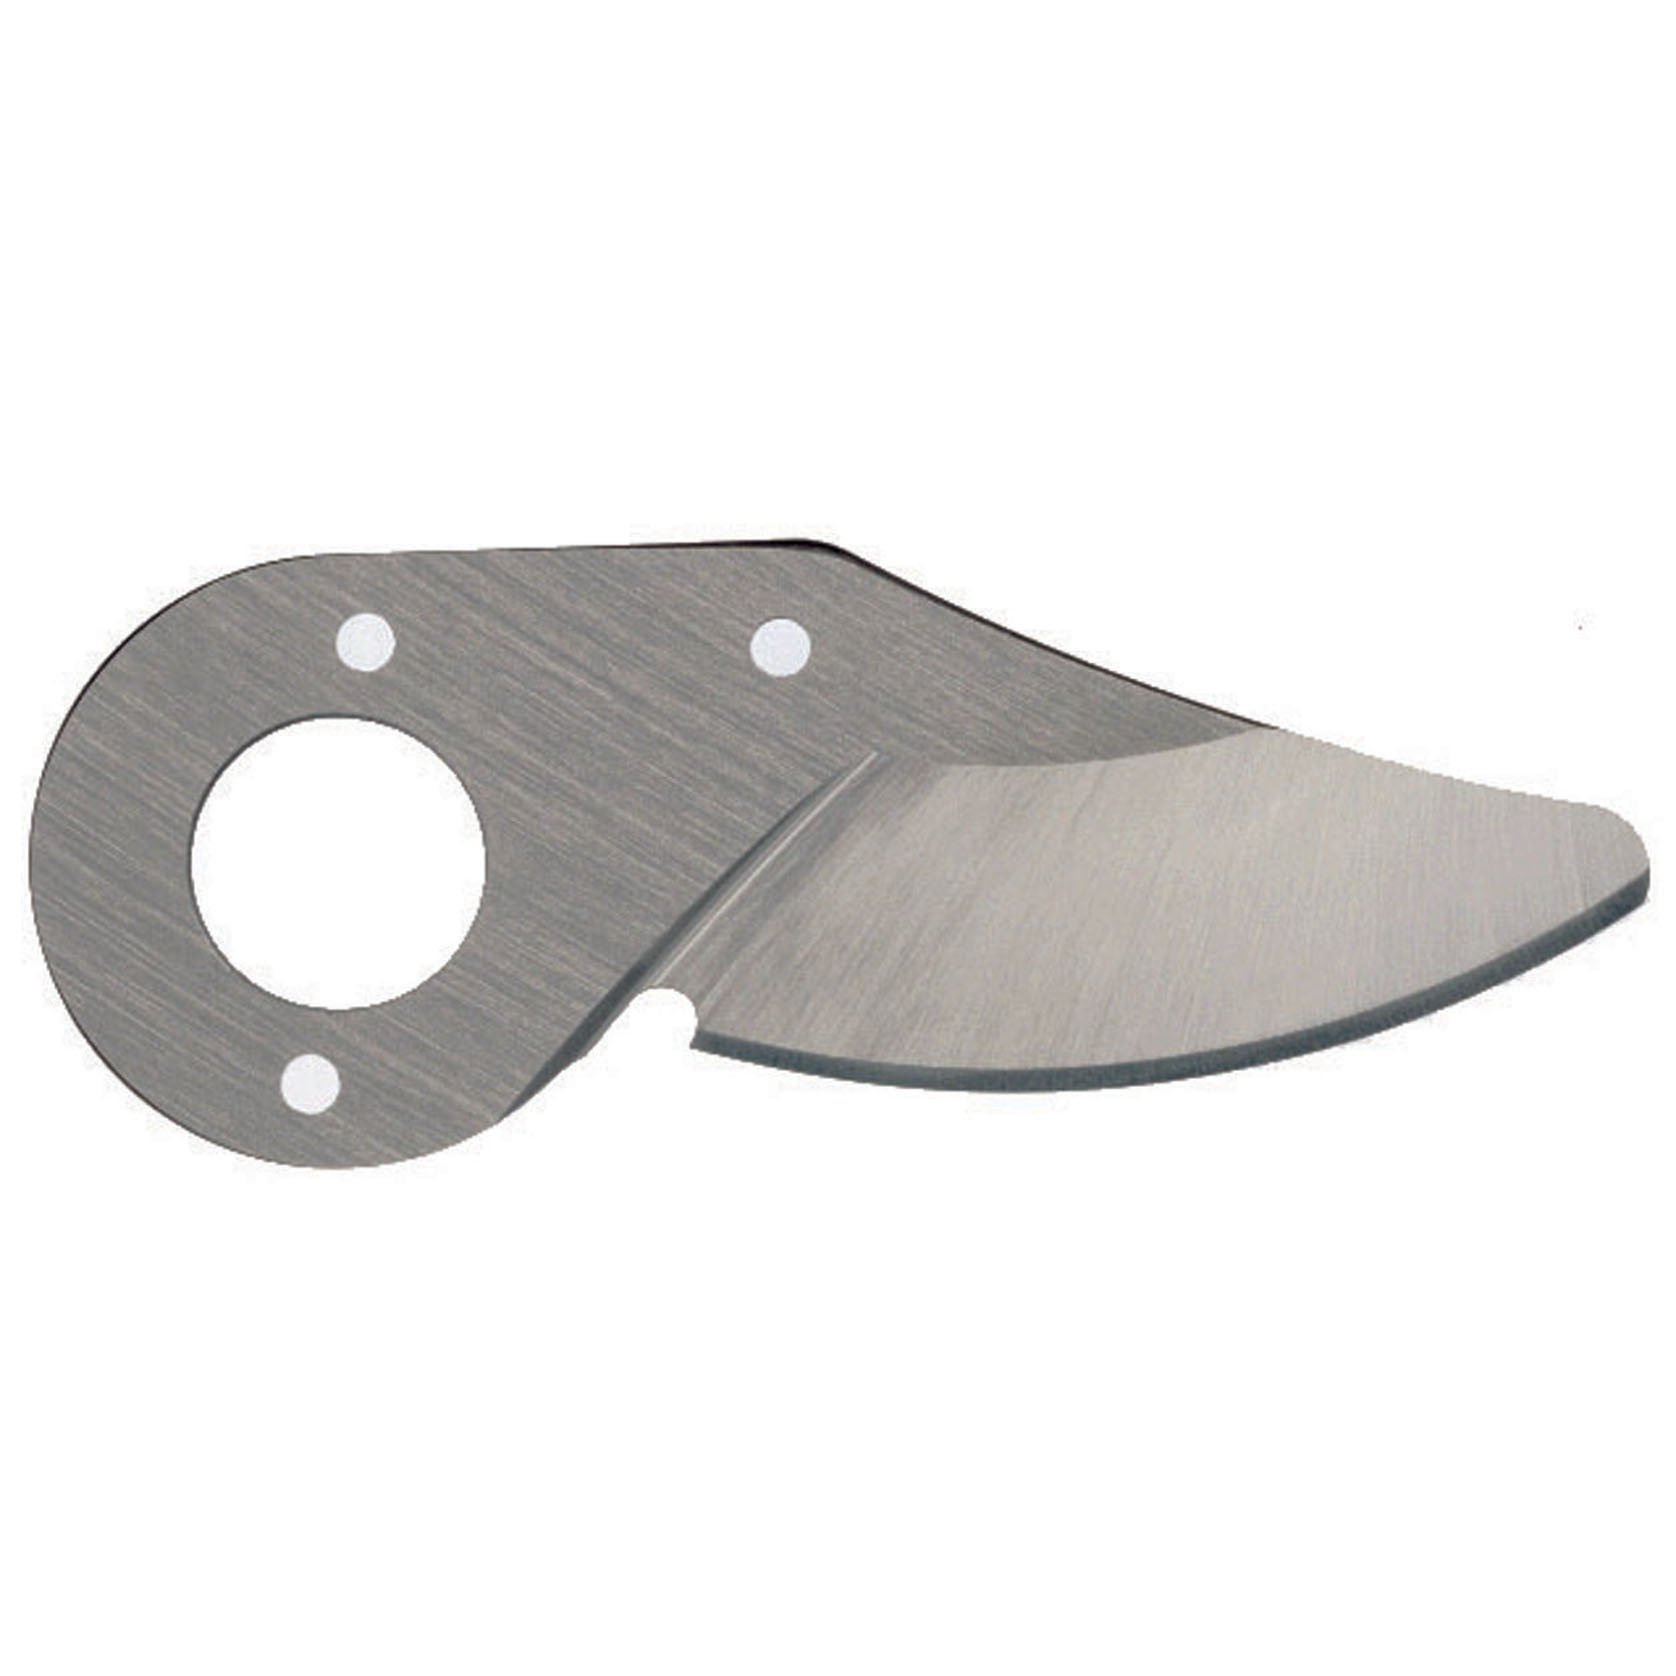 FEL63 Felco Replacement Blade for F-6 Pruning Shear